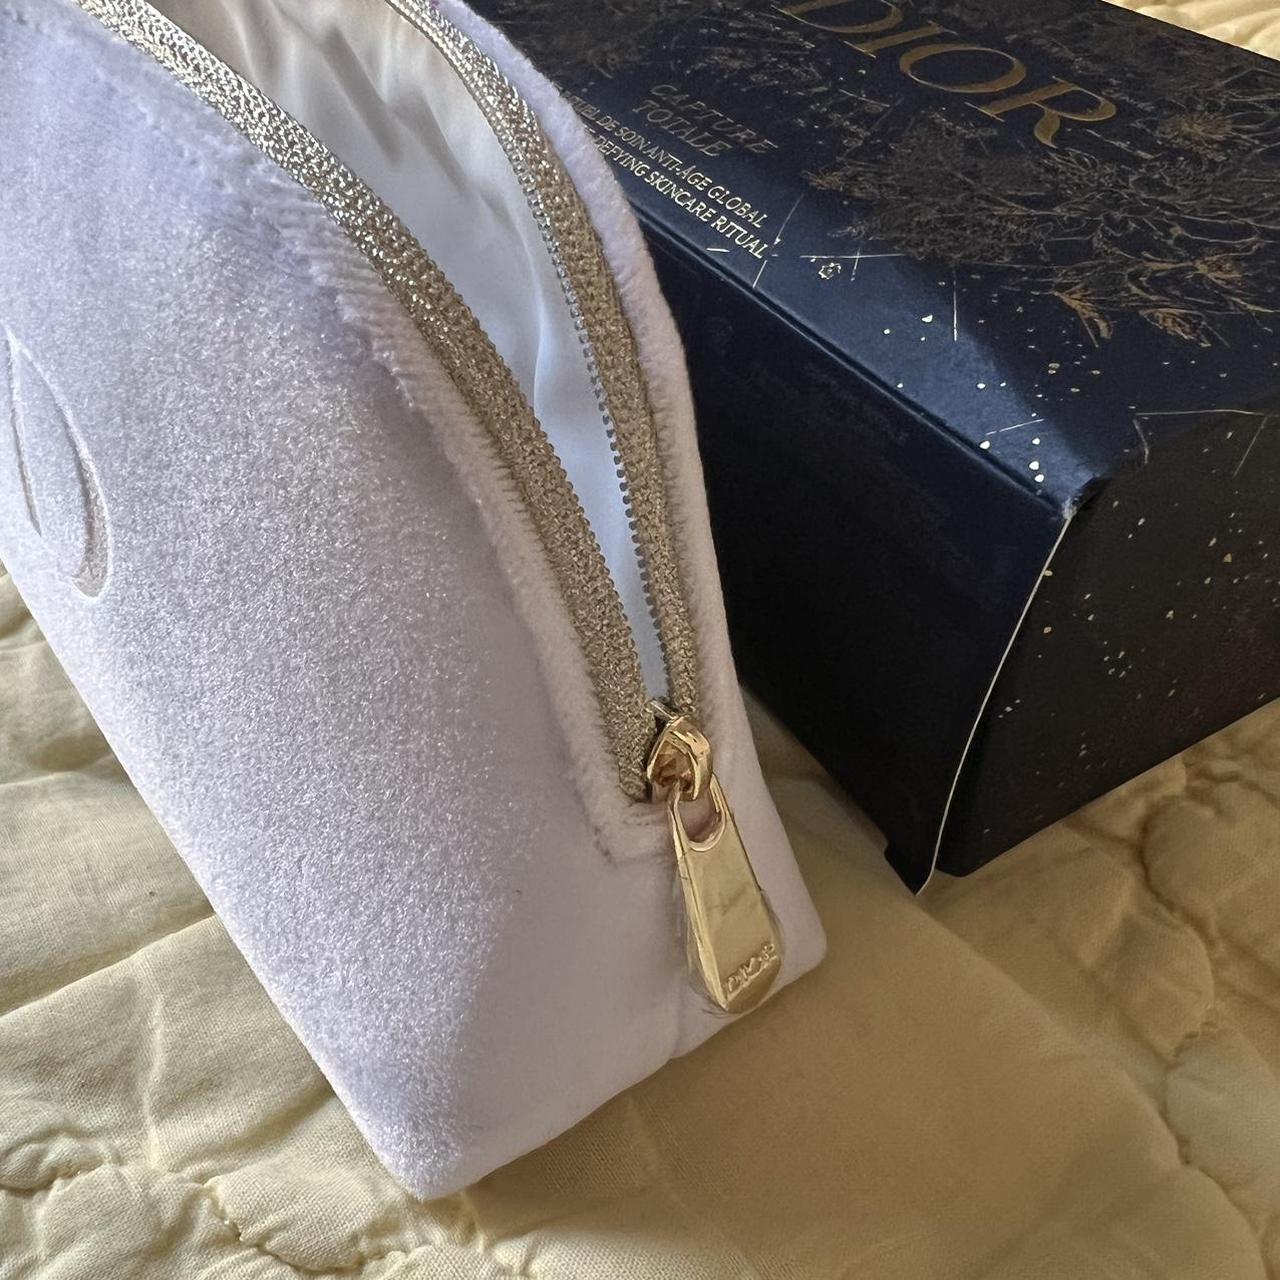 Dior Women's White and Gold Bag (4)